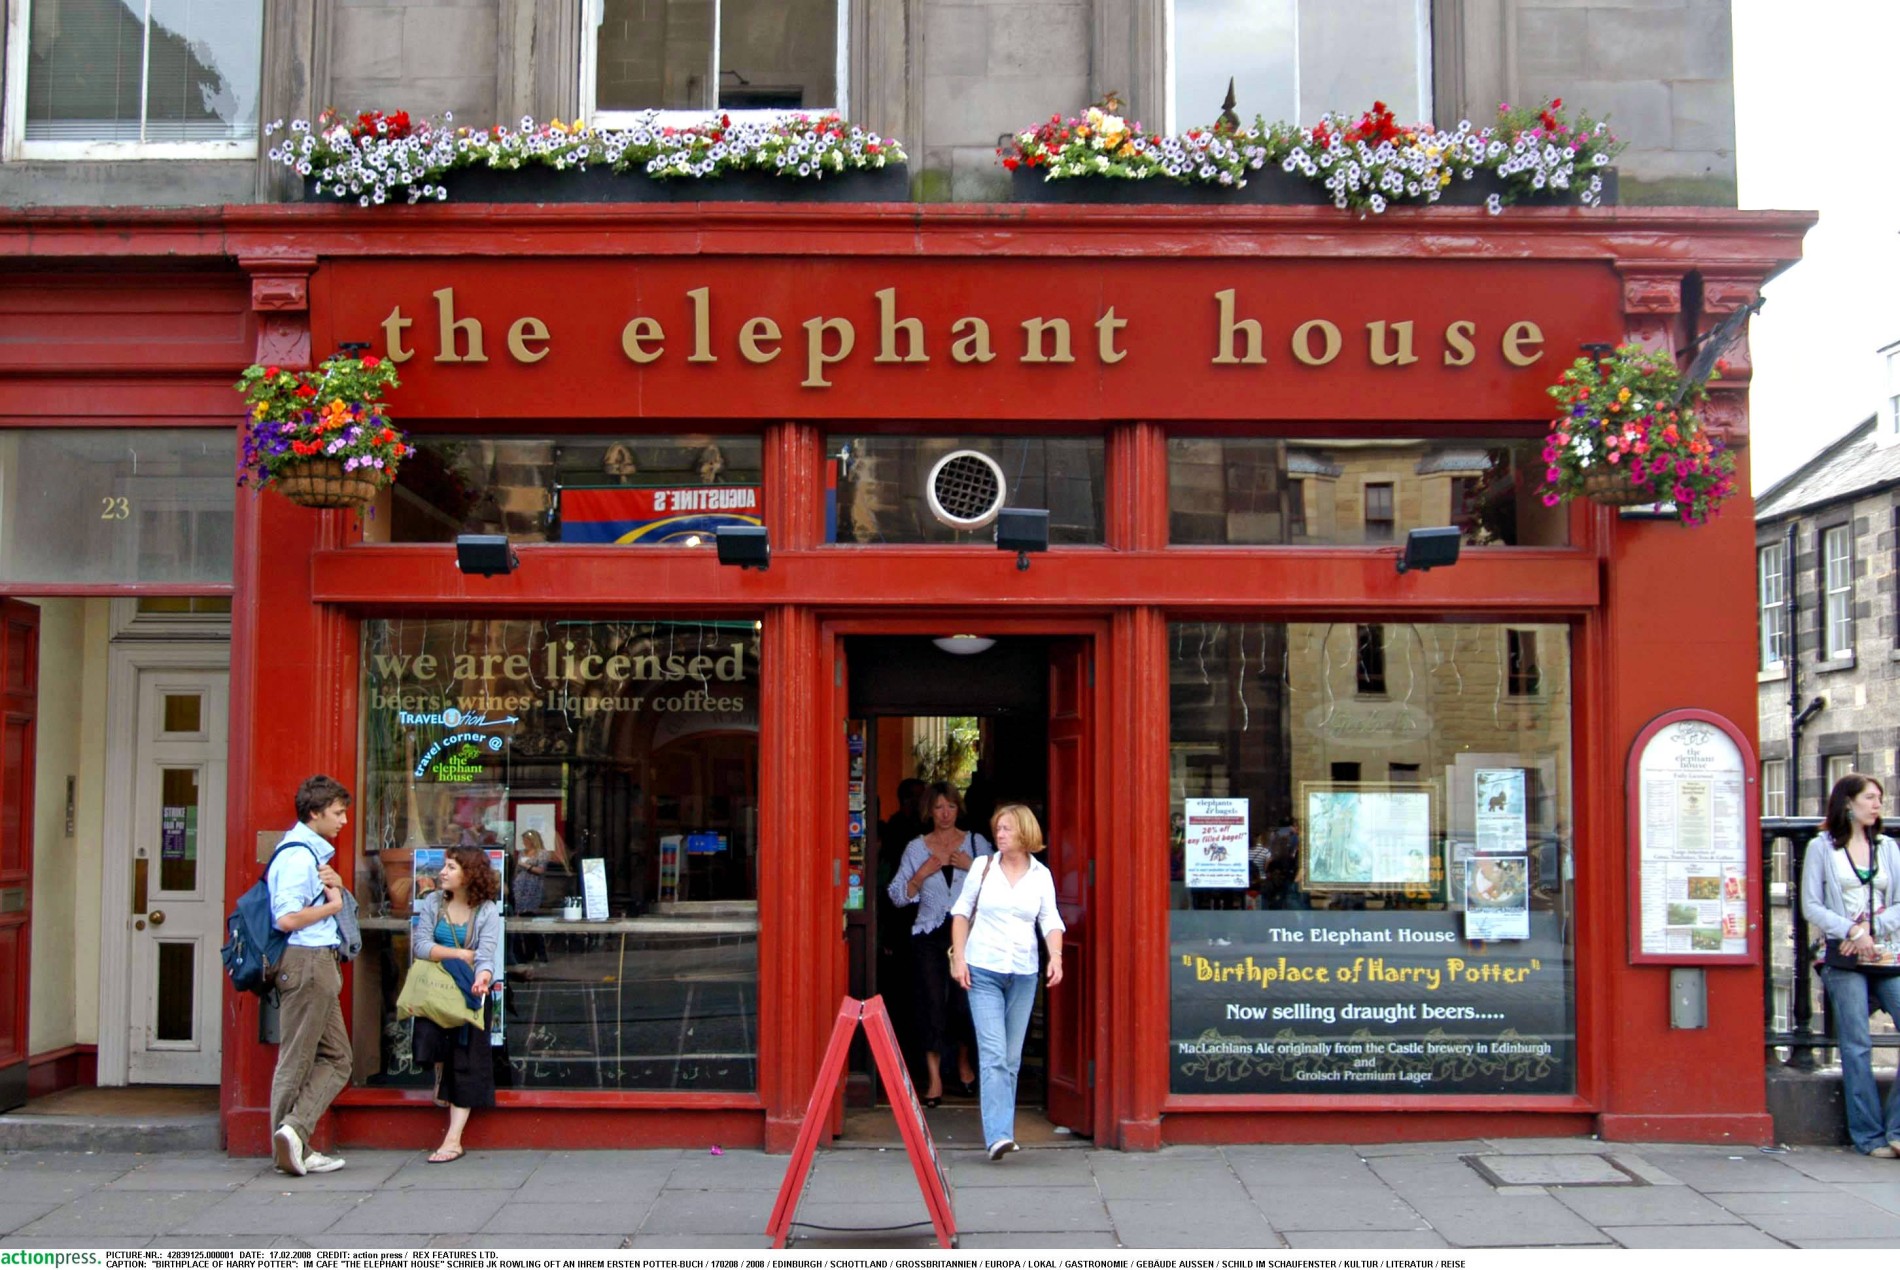 Who owns the Elephant House?